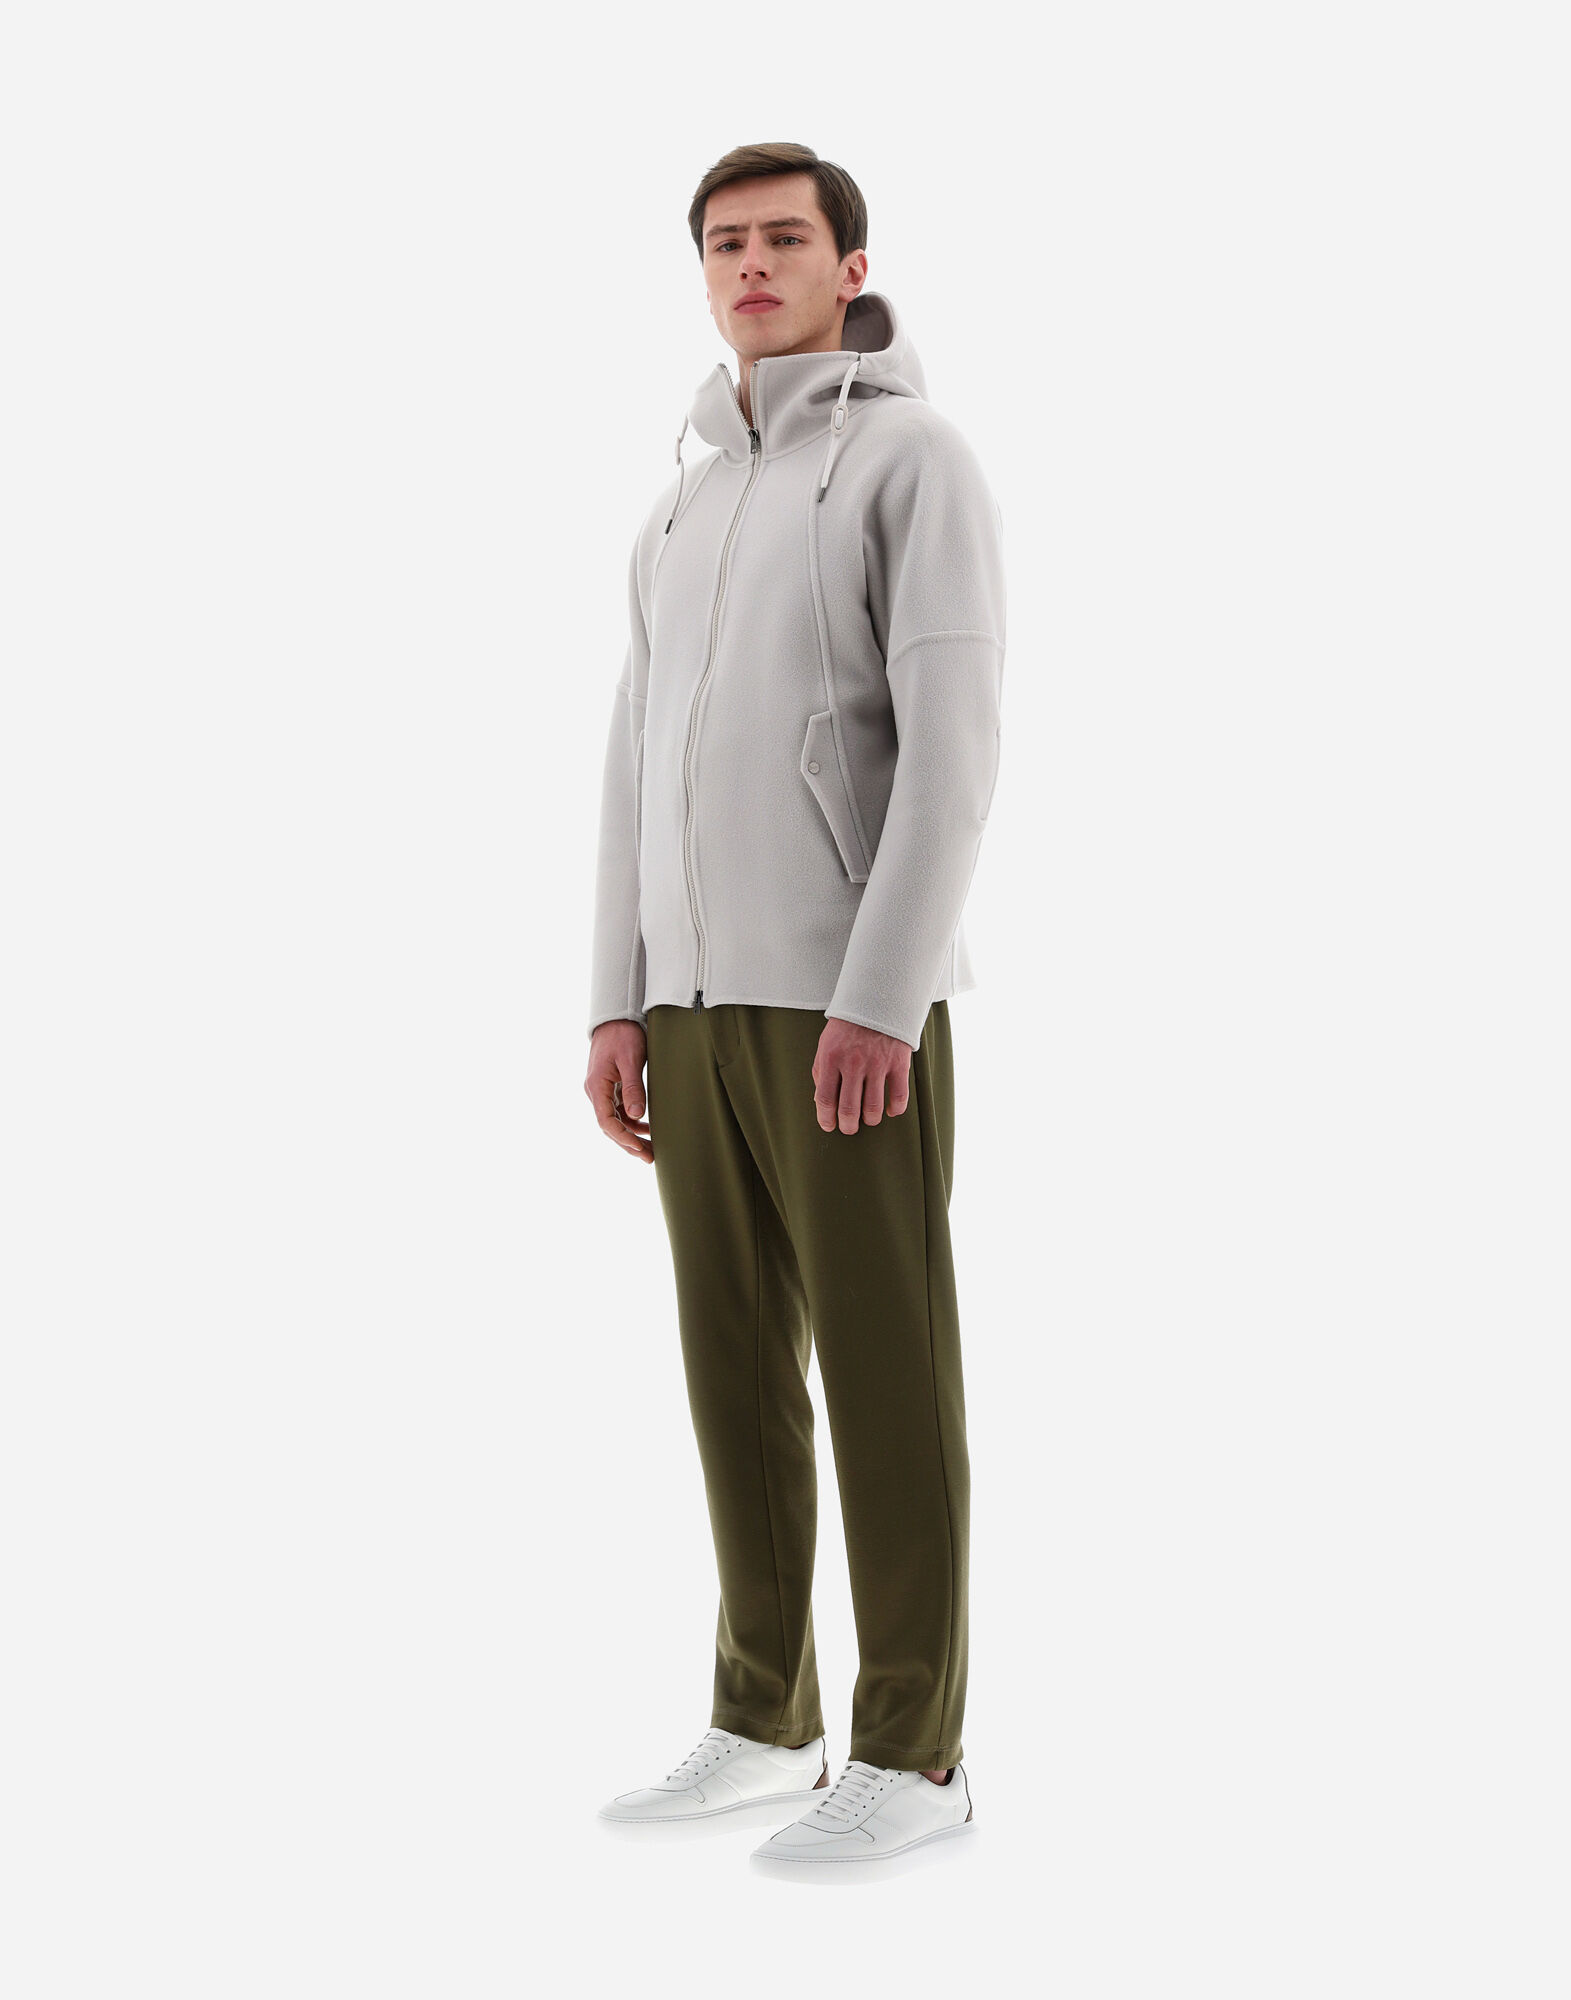 RESORT BOMBER JACKET IN MODERN DOUBLE in Chantilly for Men | Herno®